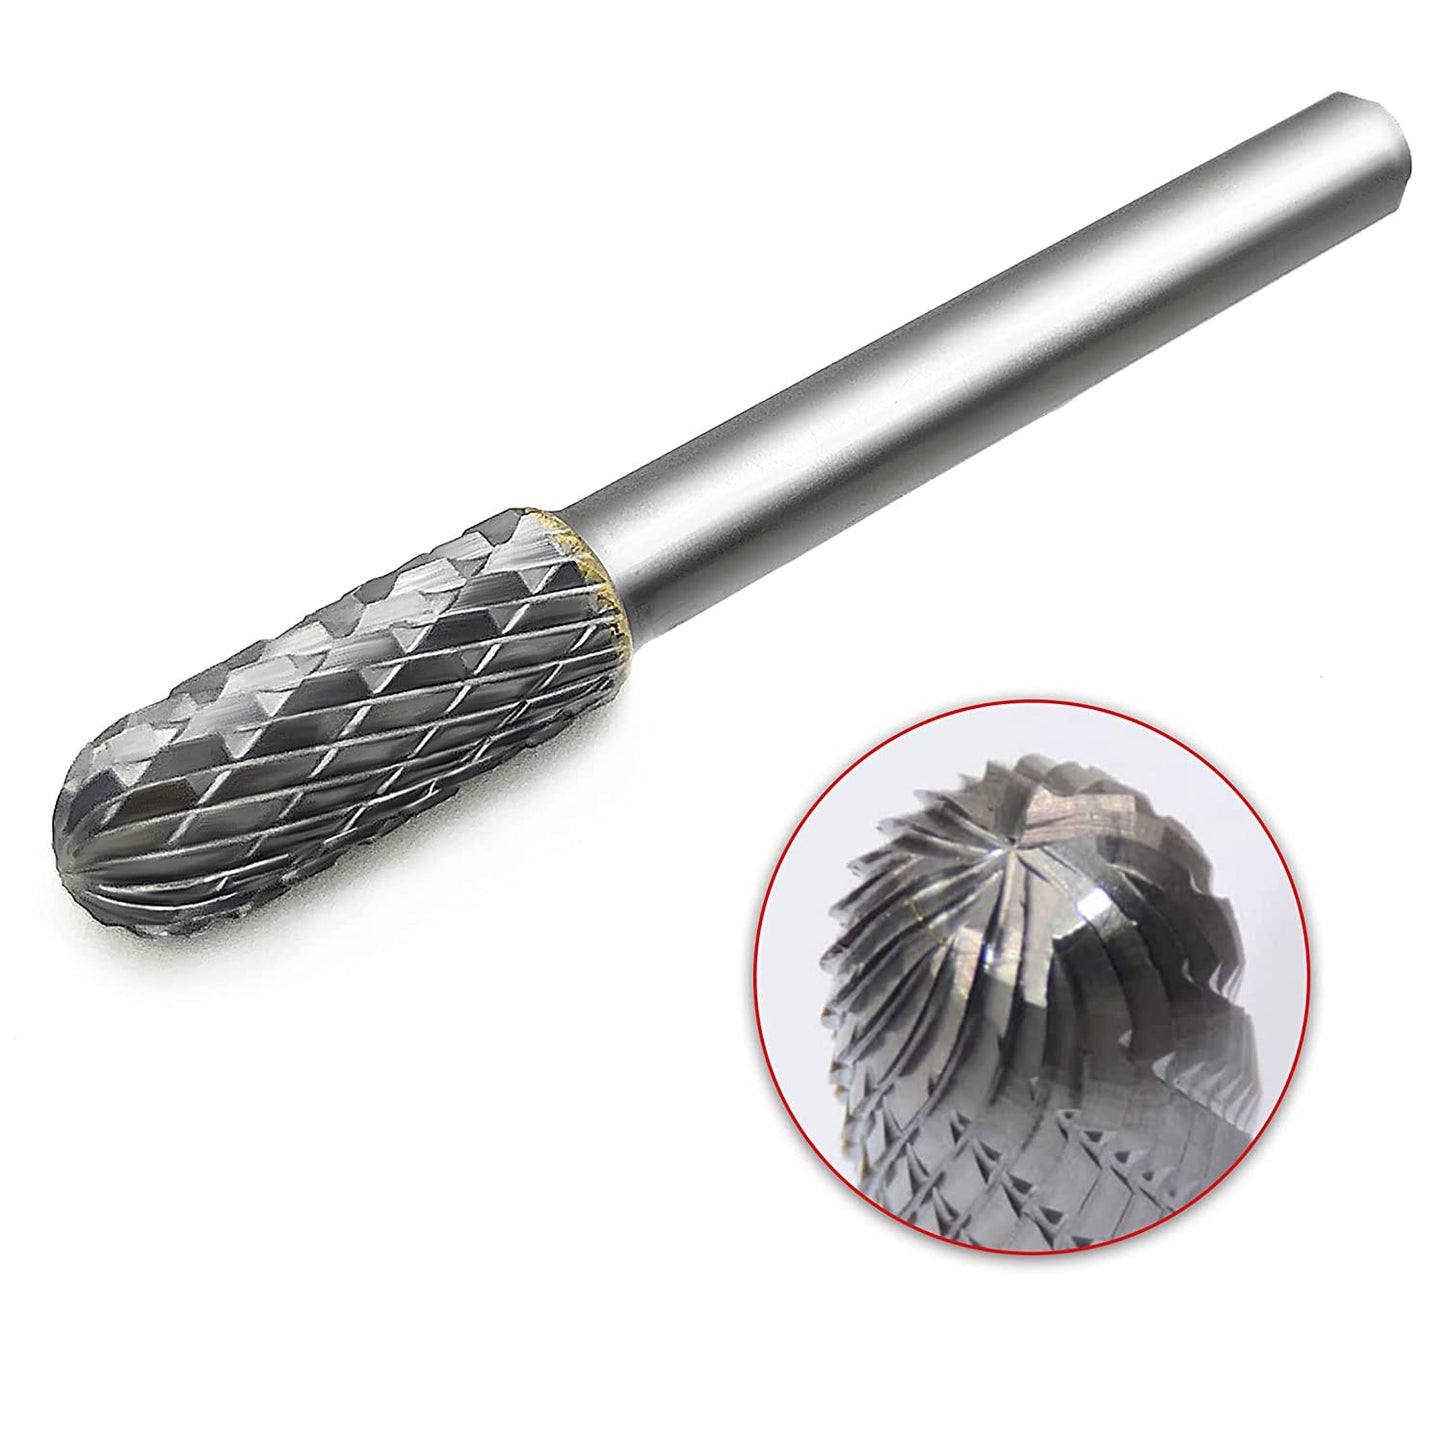 HAUTMEC Pro Ball Nosed Cylinder Tungsten Rotary File Carbide Burr Double Cut (Metal Grinding Polishing Carving Tool Drill Bits) 1/4 In Shank Diameter for Die Grinder Kits HT0199-MC